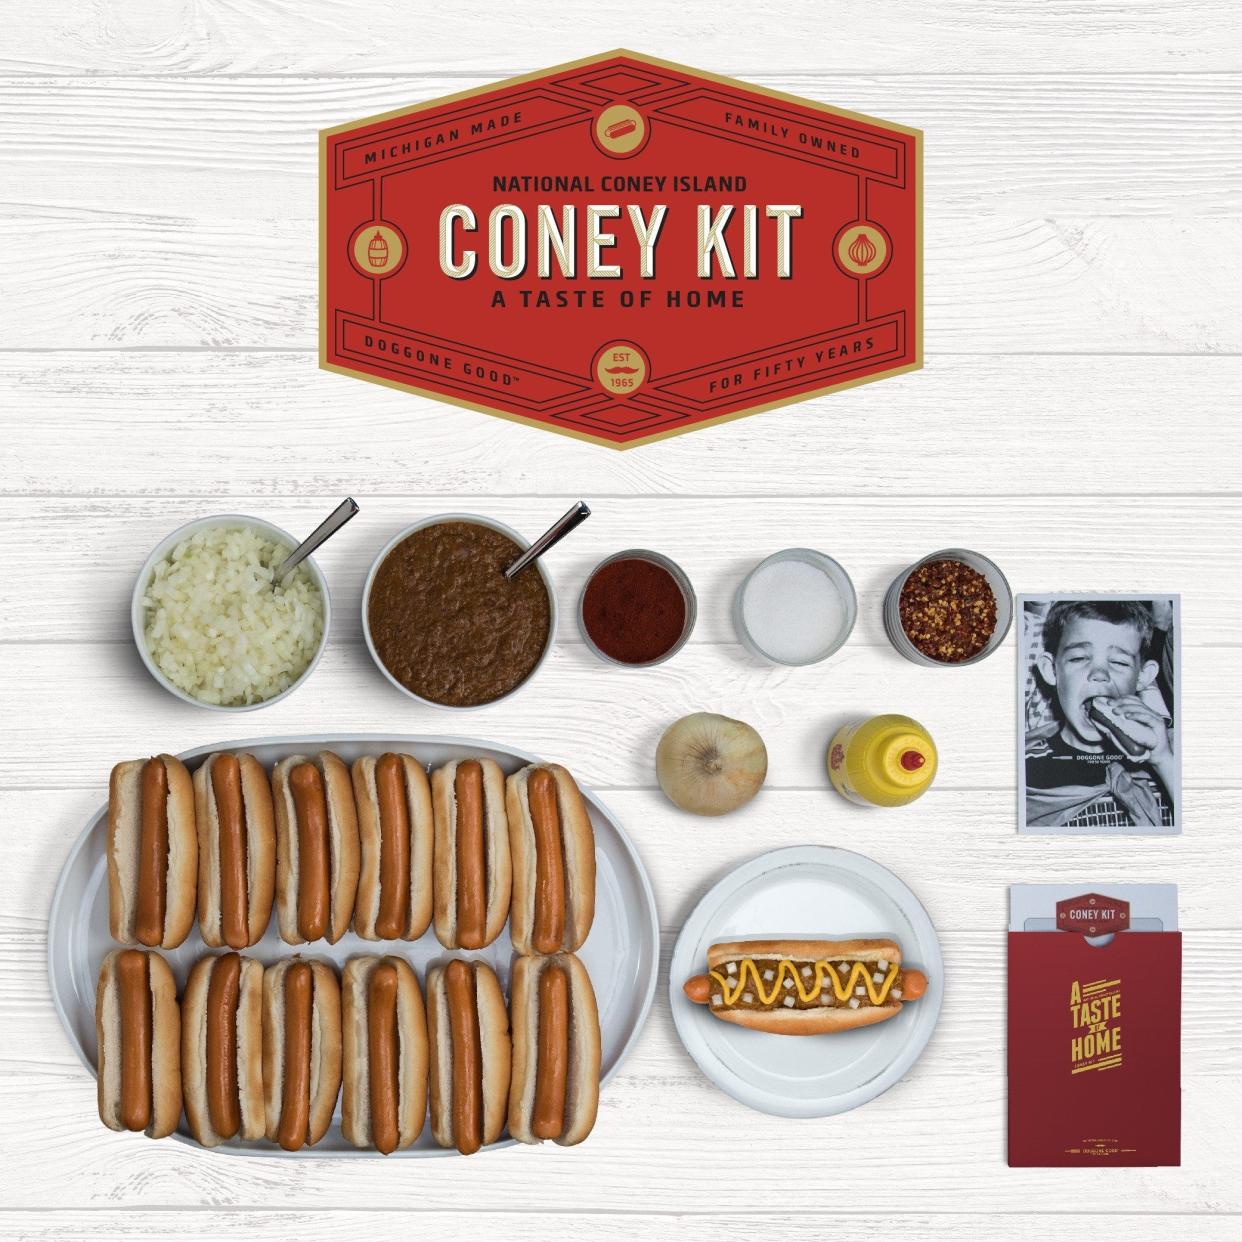 National Coney Islands Coney Kits come with 12 or 24 hot dogs.